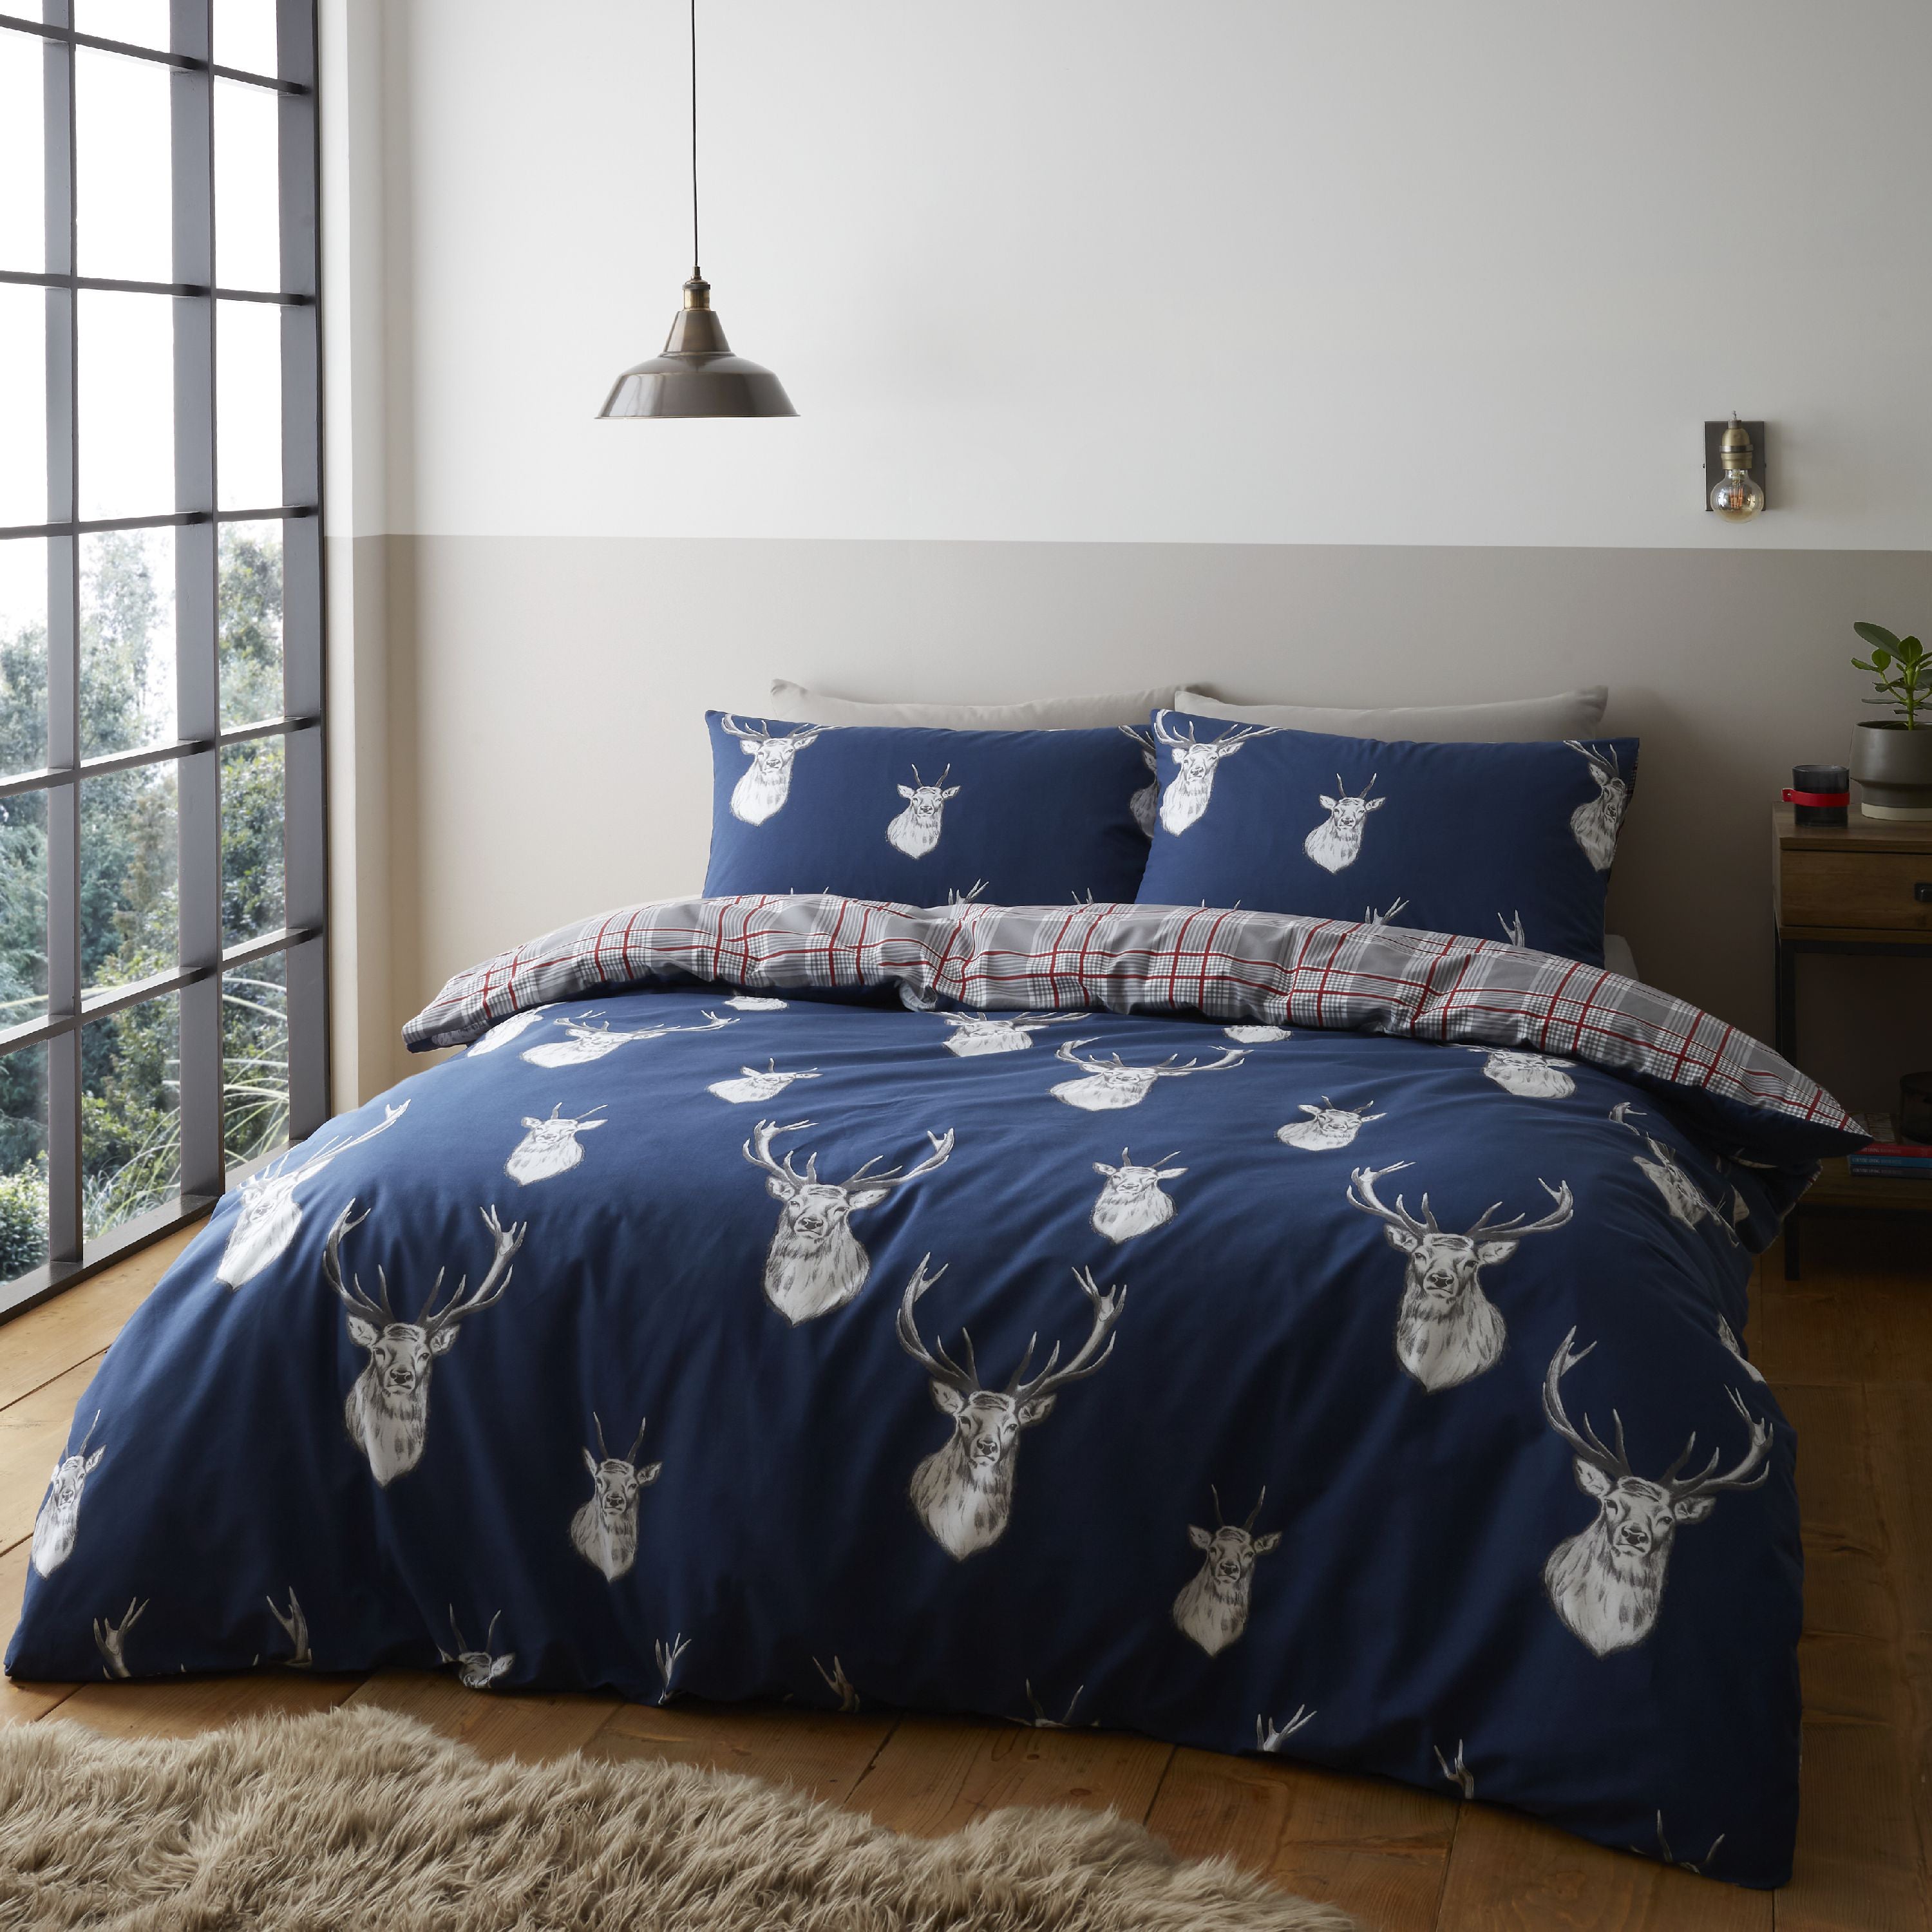 Catherine Lansfield Stag Navy Duvet Cover And Pillowcase Set Navy Bluewhite